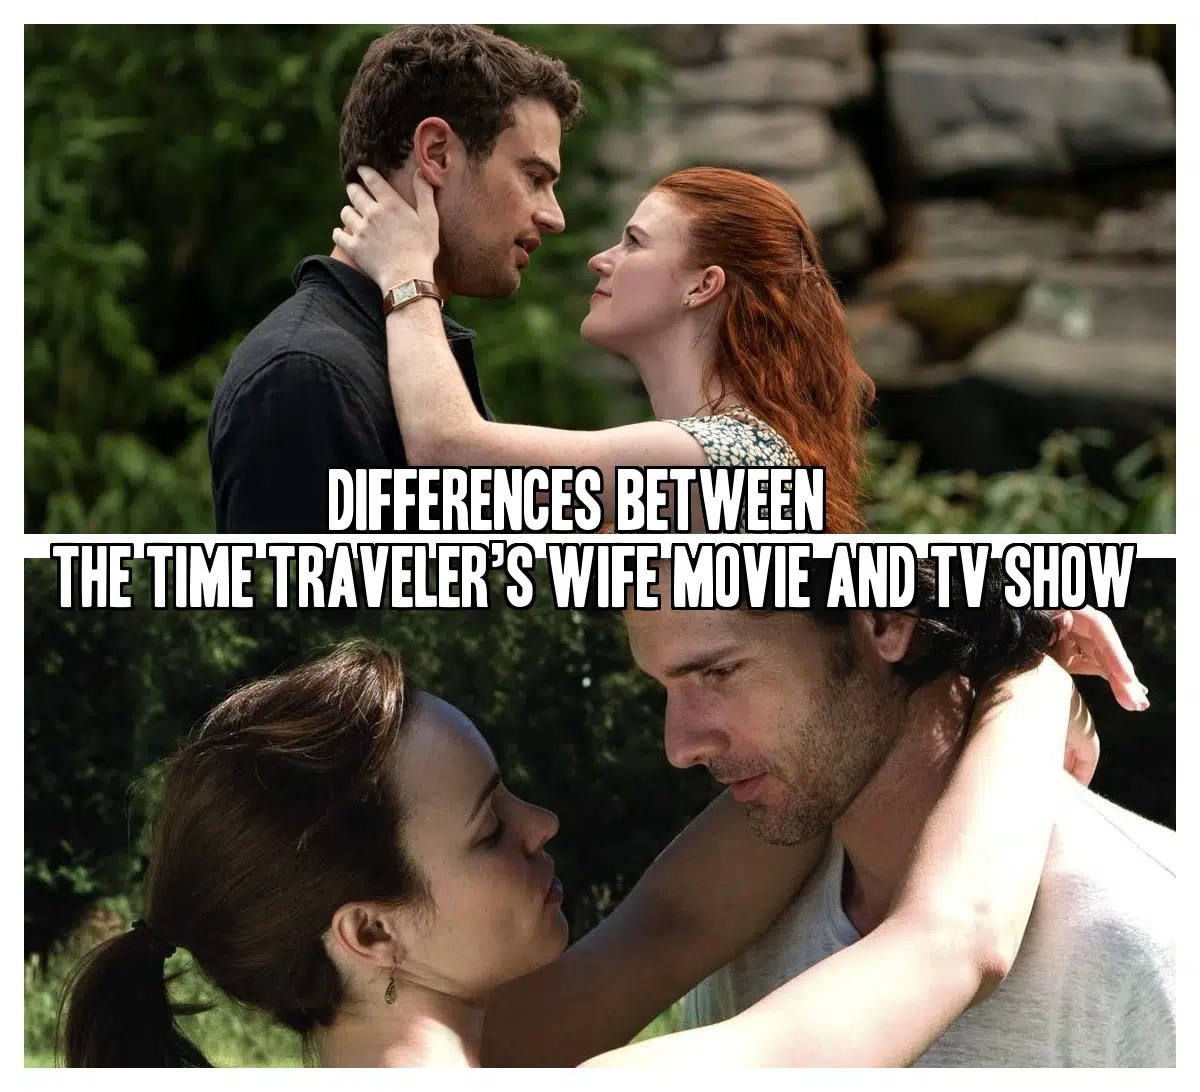 Differences Between The Time Traveler’s Wife Movie and TV Show